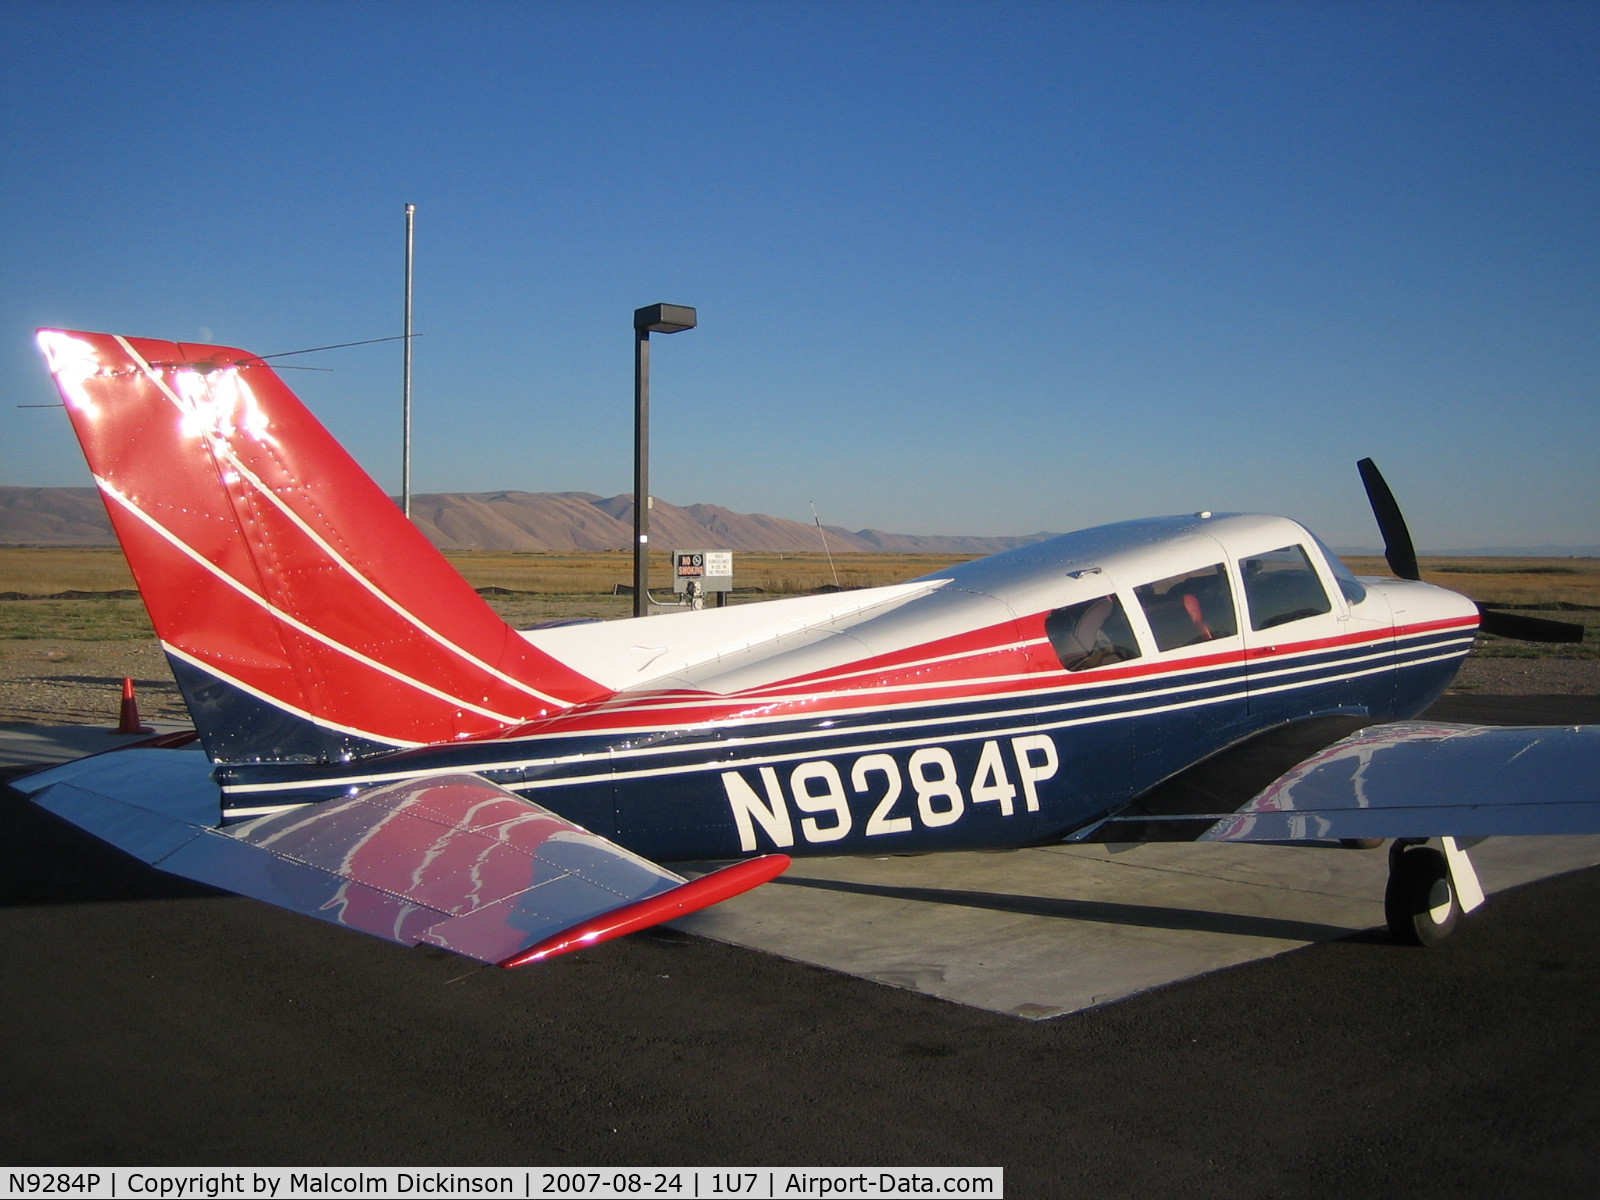 N9284P, 1968 Piper PA-24-260 C/N 24-4784, Comanche 260B with fresh paint